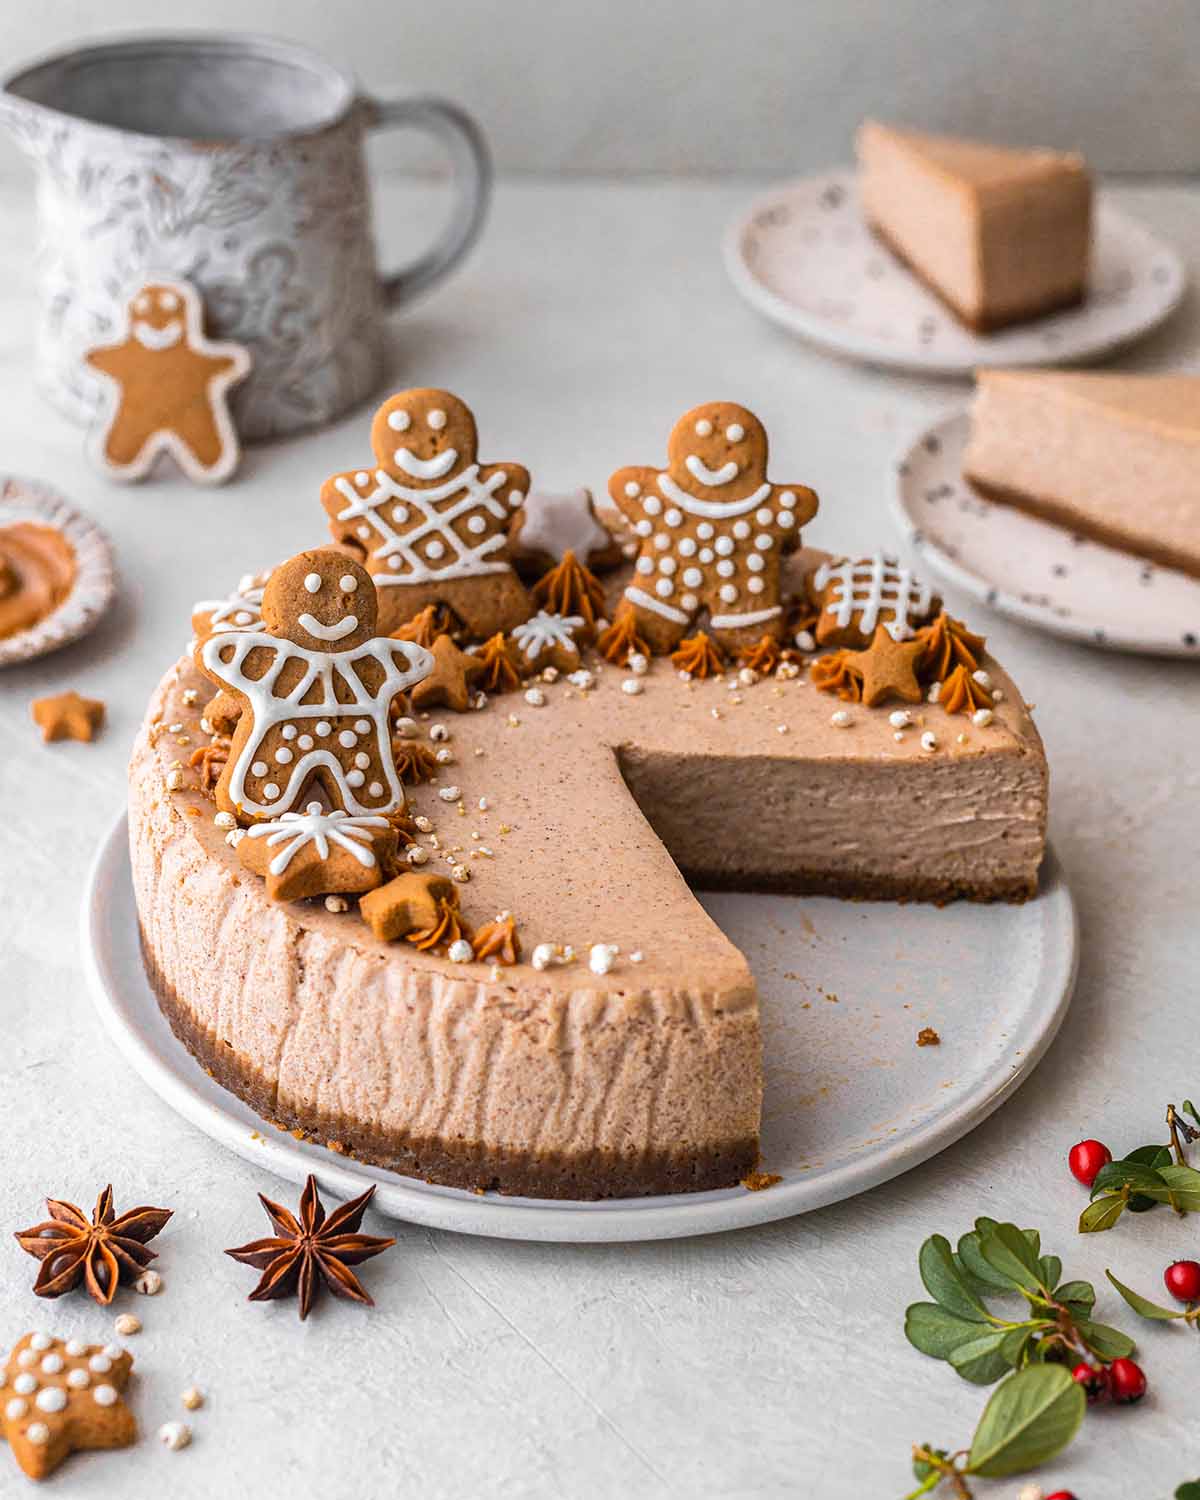 Vegan gingerbread cheesecake on plate with a few slices taken out showing creamy interior. Cheesecake is decorated with gingerbread cookies and piped Biscoff spread.